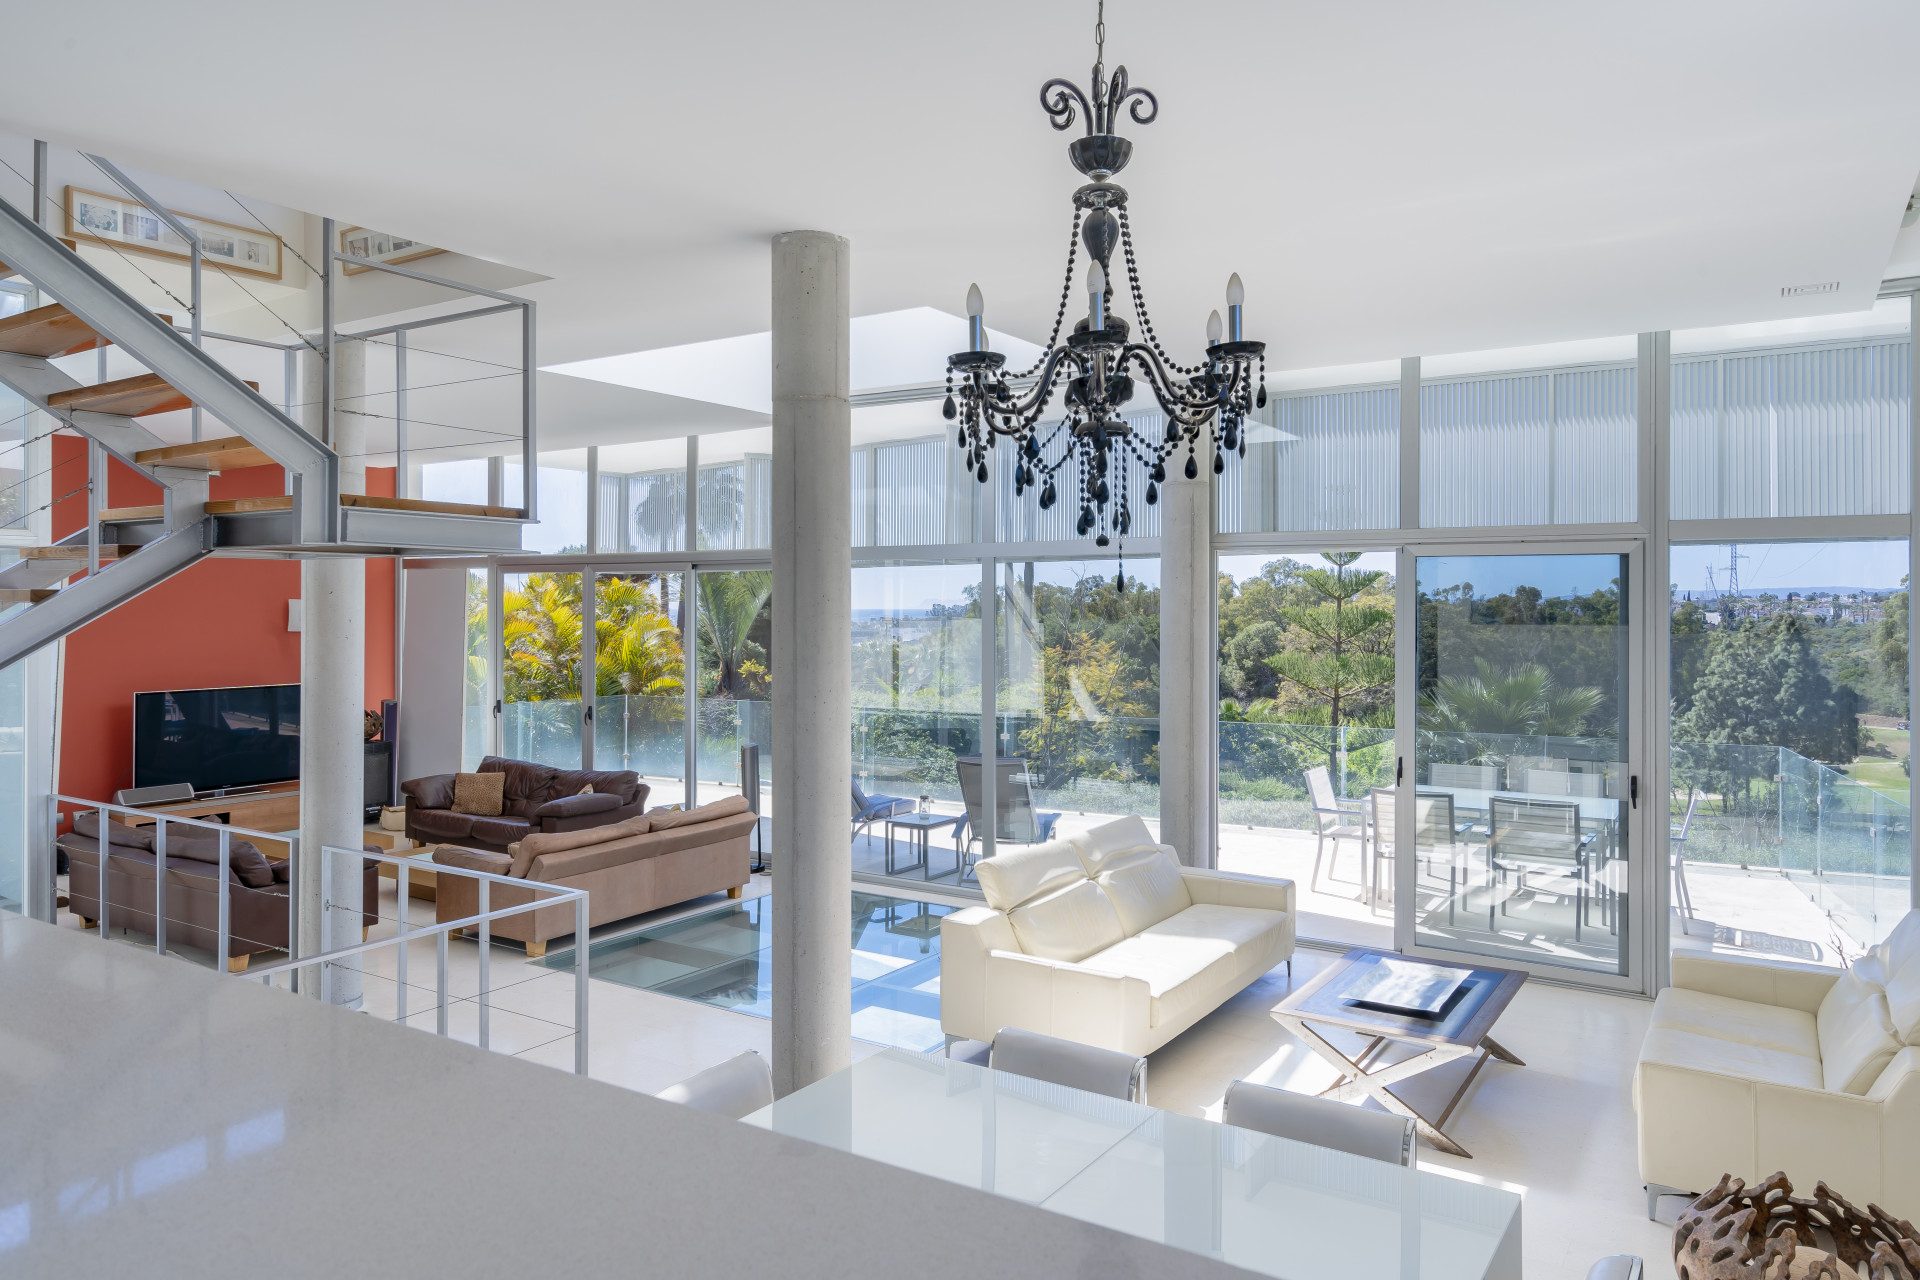 Unique contemporary villa in the well-known area of Paraiso Medio superbly built on a 1.025m2 plot